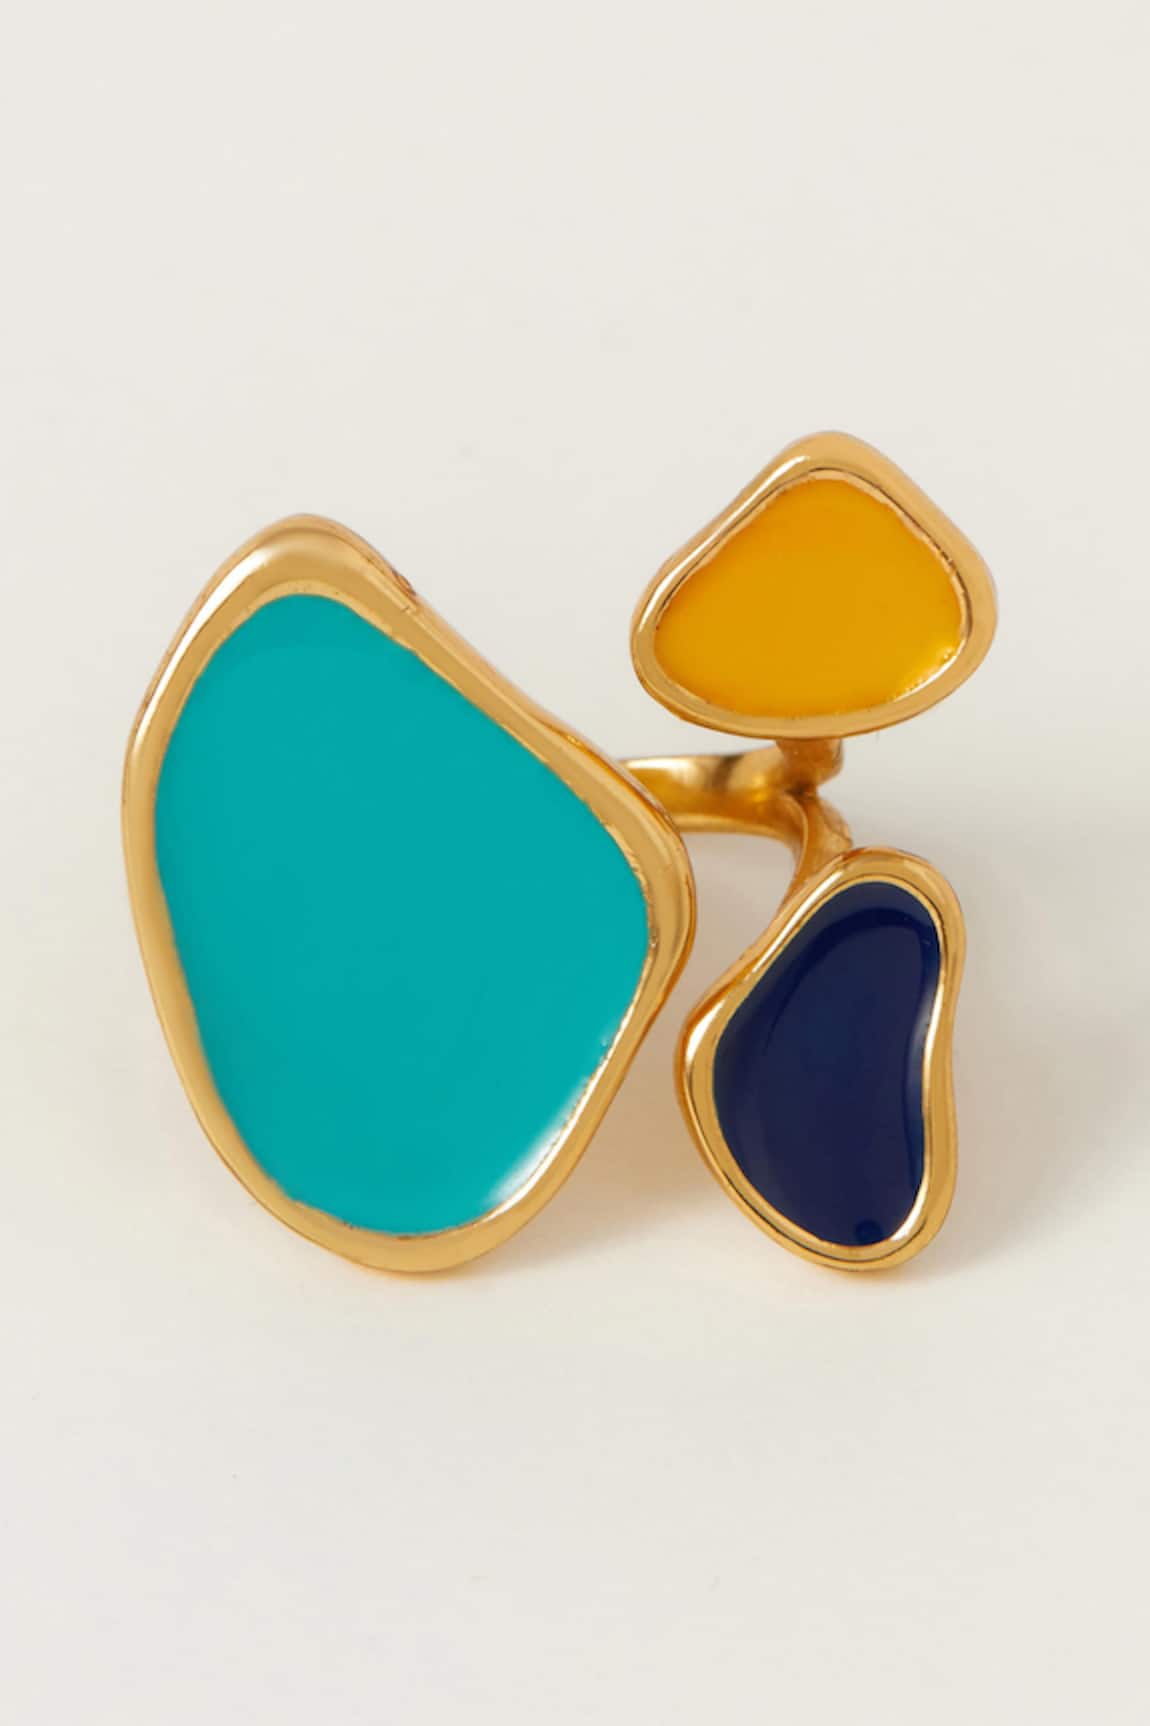 Voyce Jewellery Byron Bay Abstract Shaped Enameled Ring